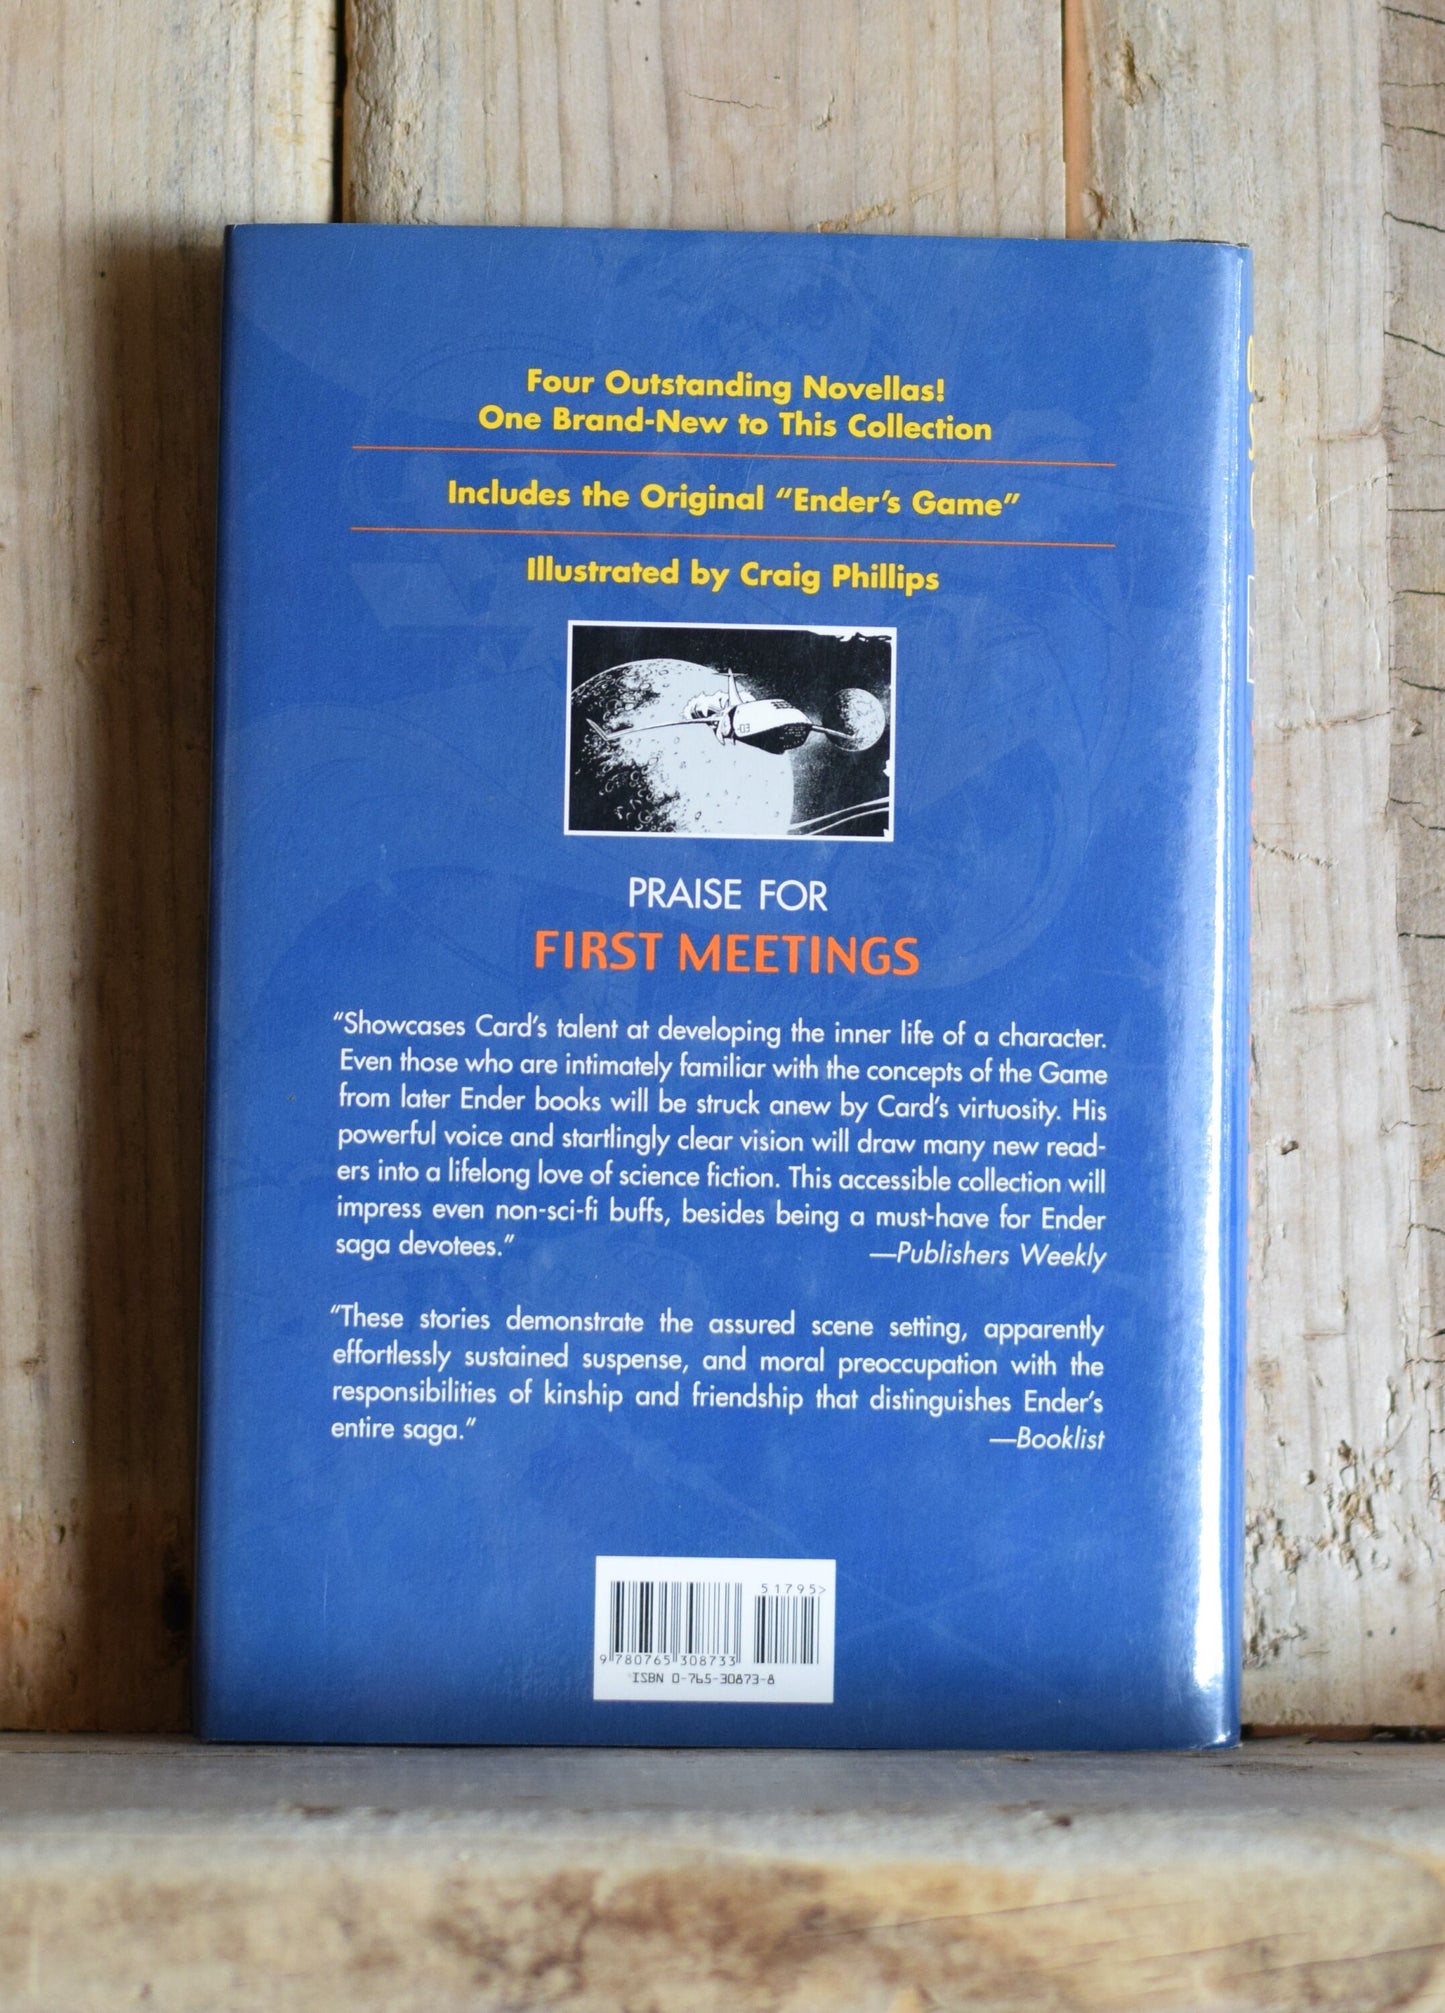 Vintage Sci-Fi Hardback Novel: Orson Scott Card - First Meetings in the Enderverse FIRST EDITION/PRINTING